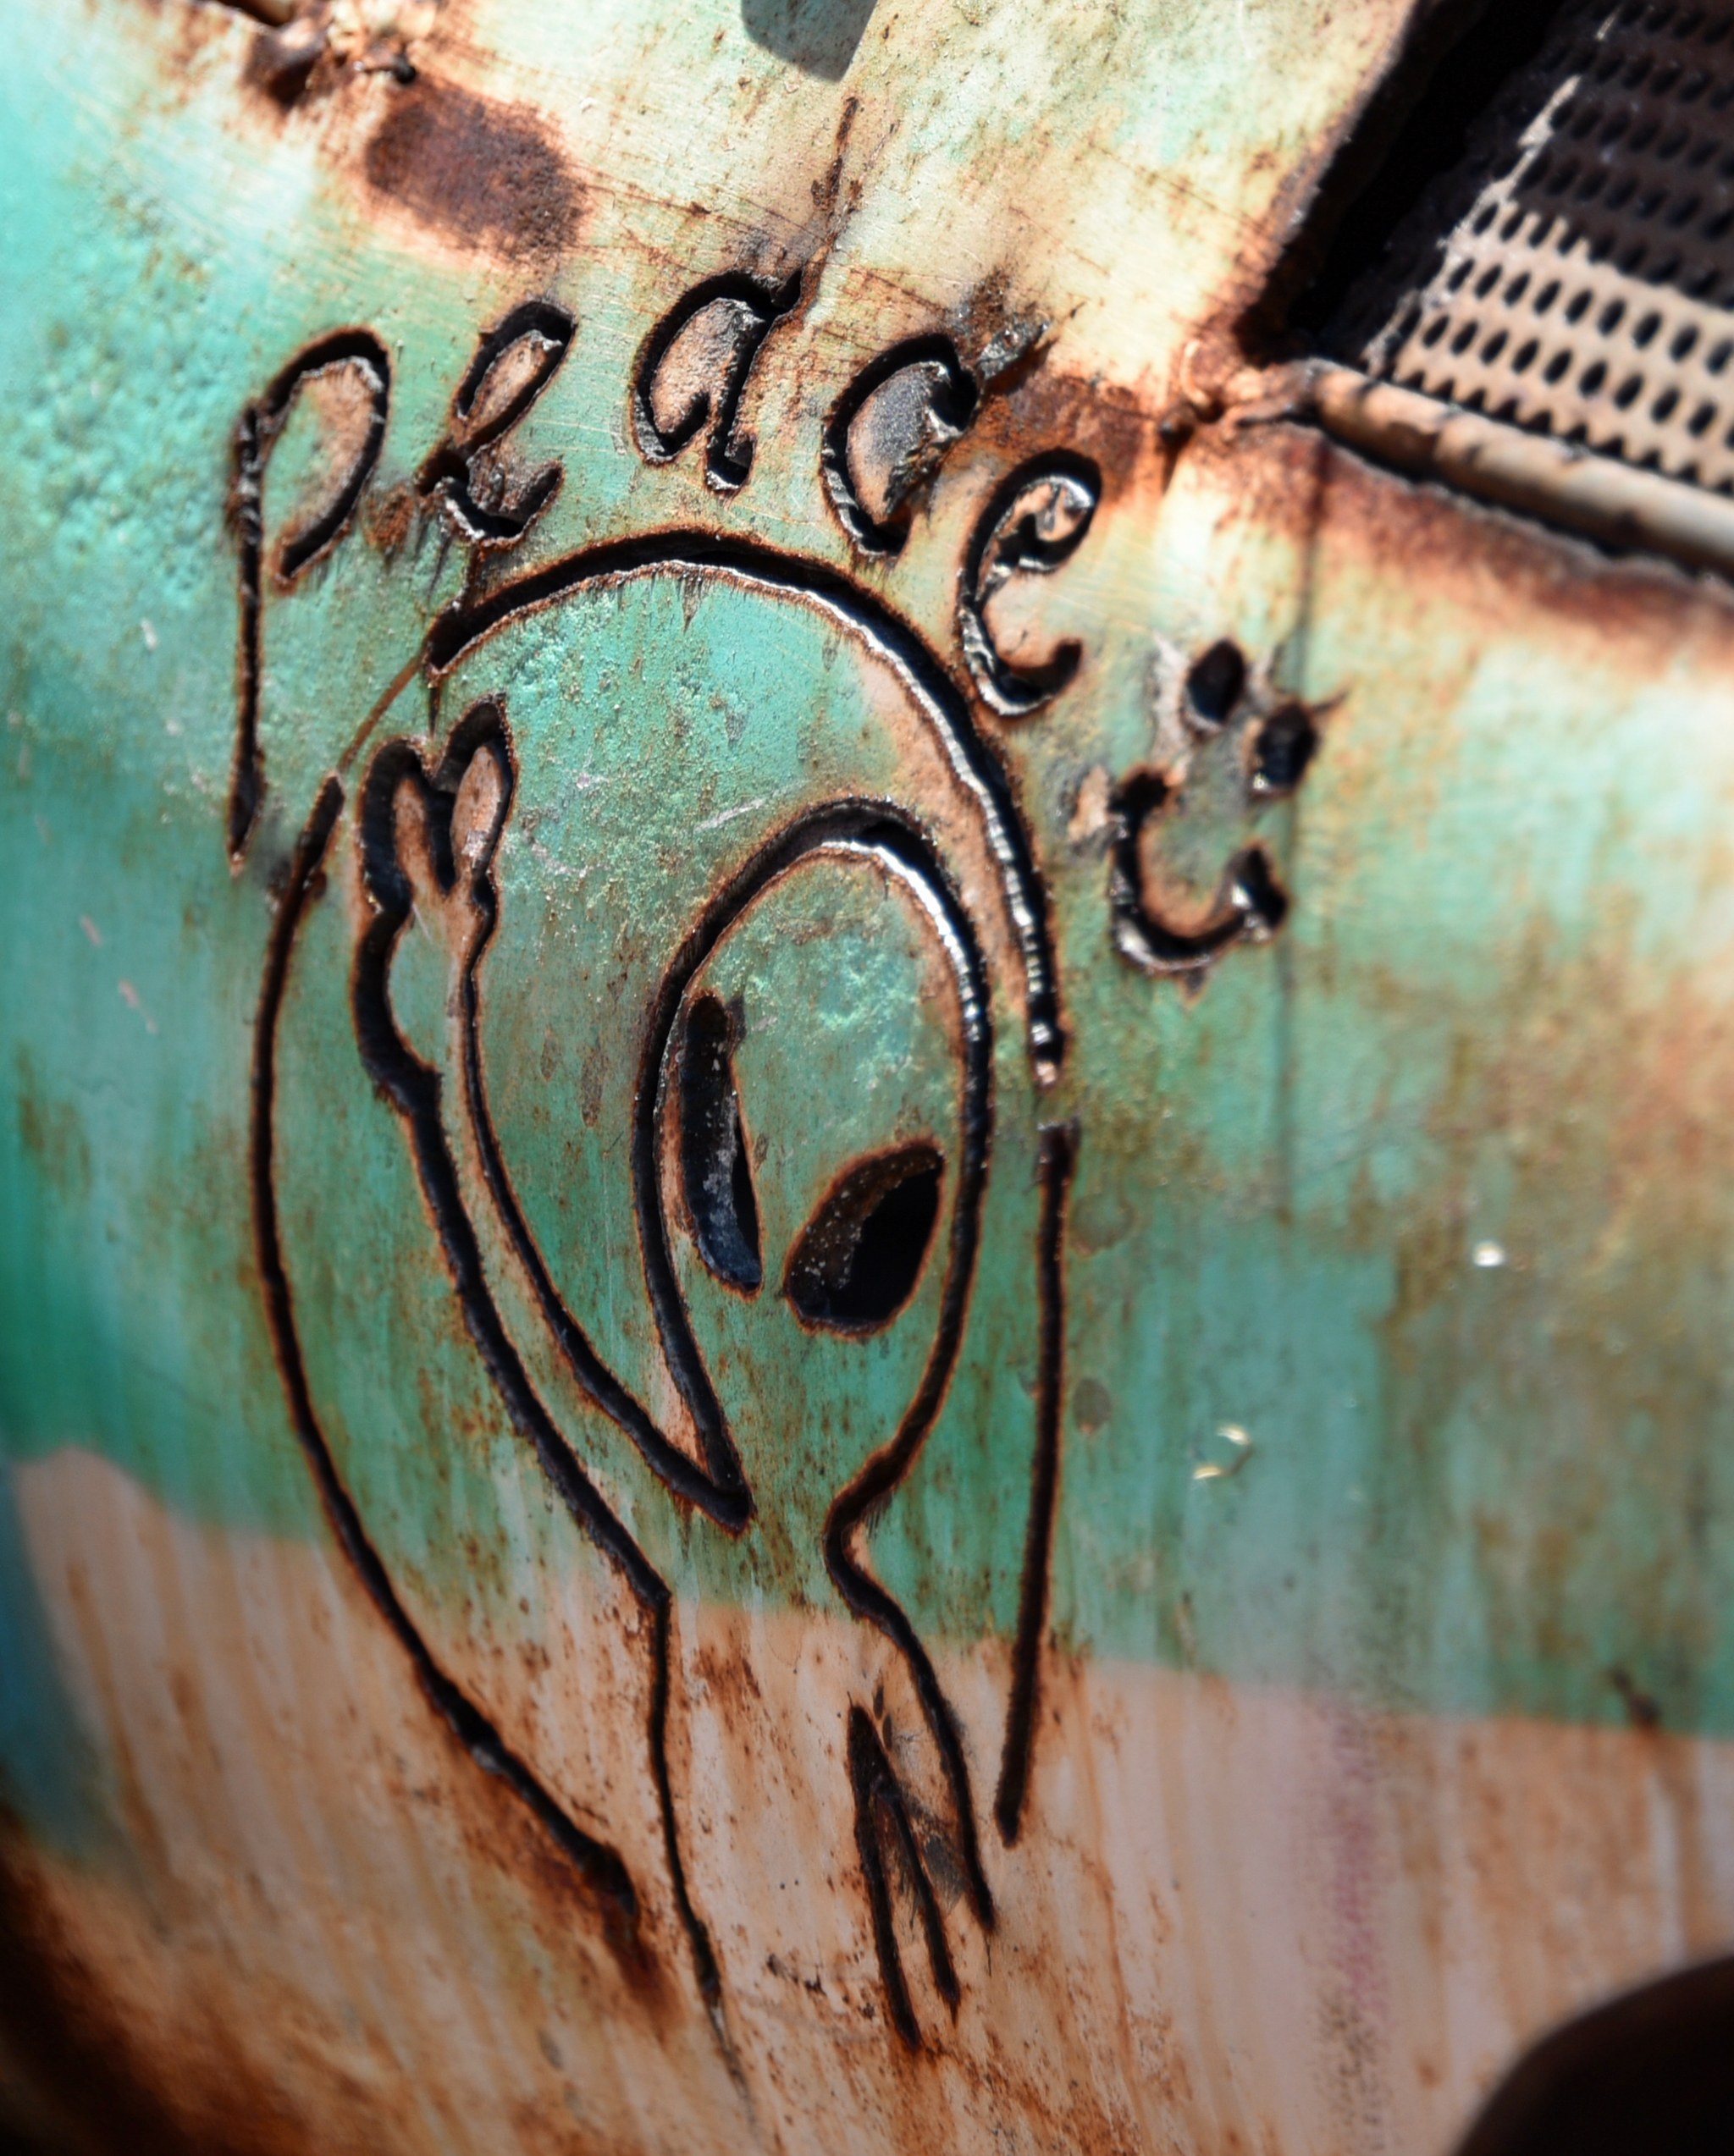 An image of an alien and the word 'peace' on the side of some metal.